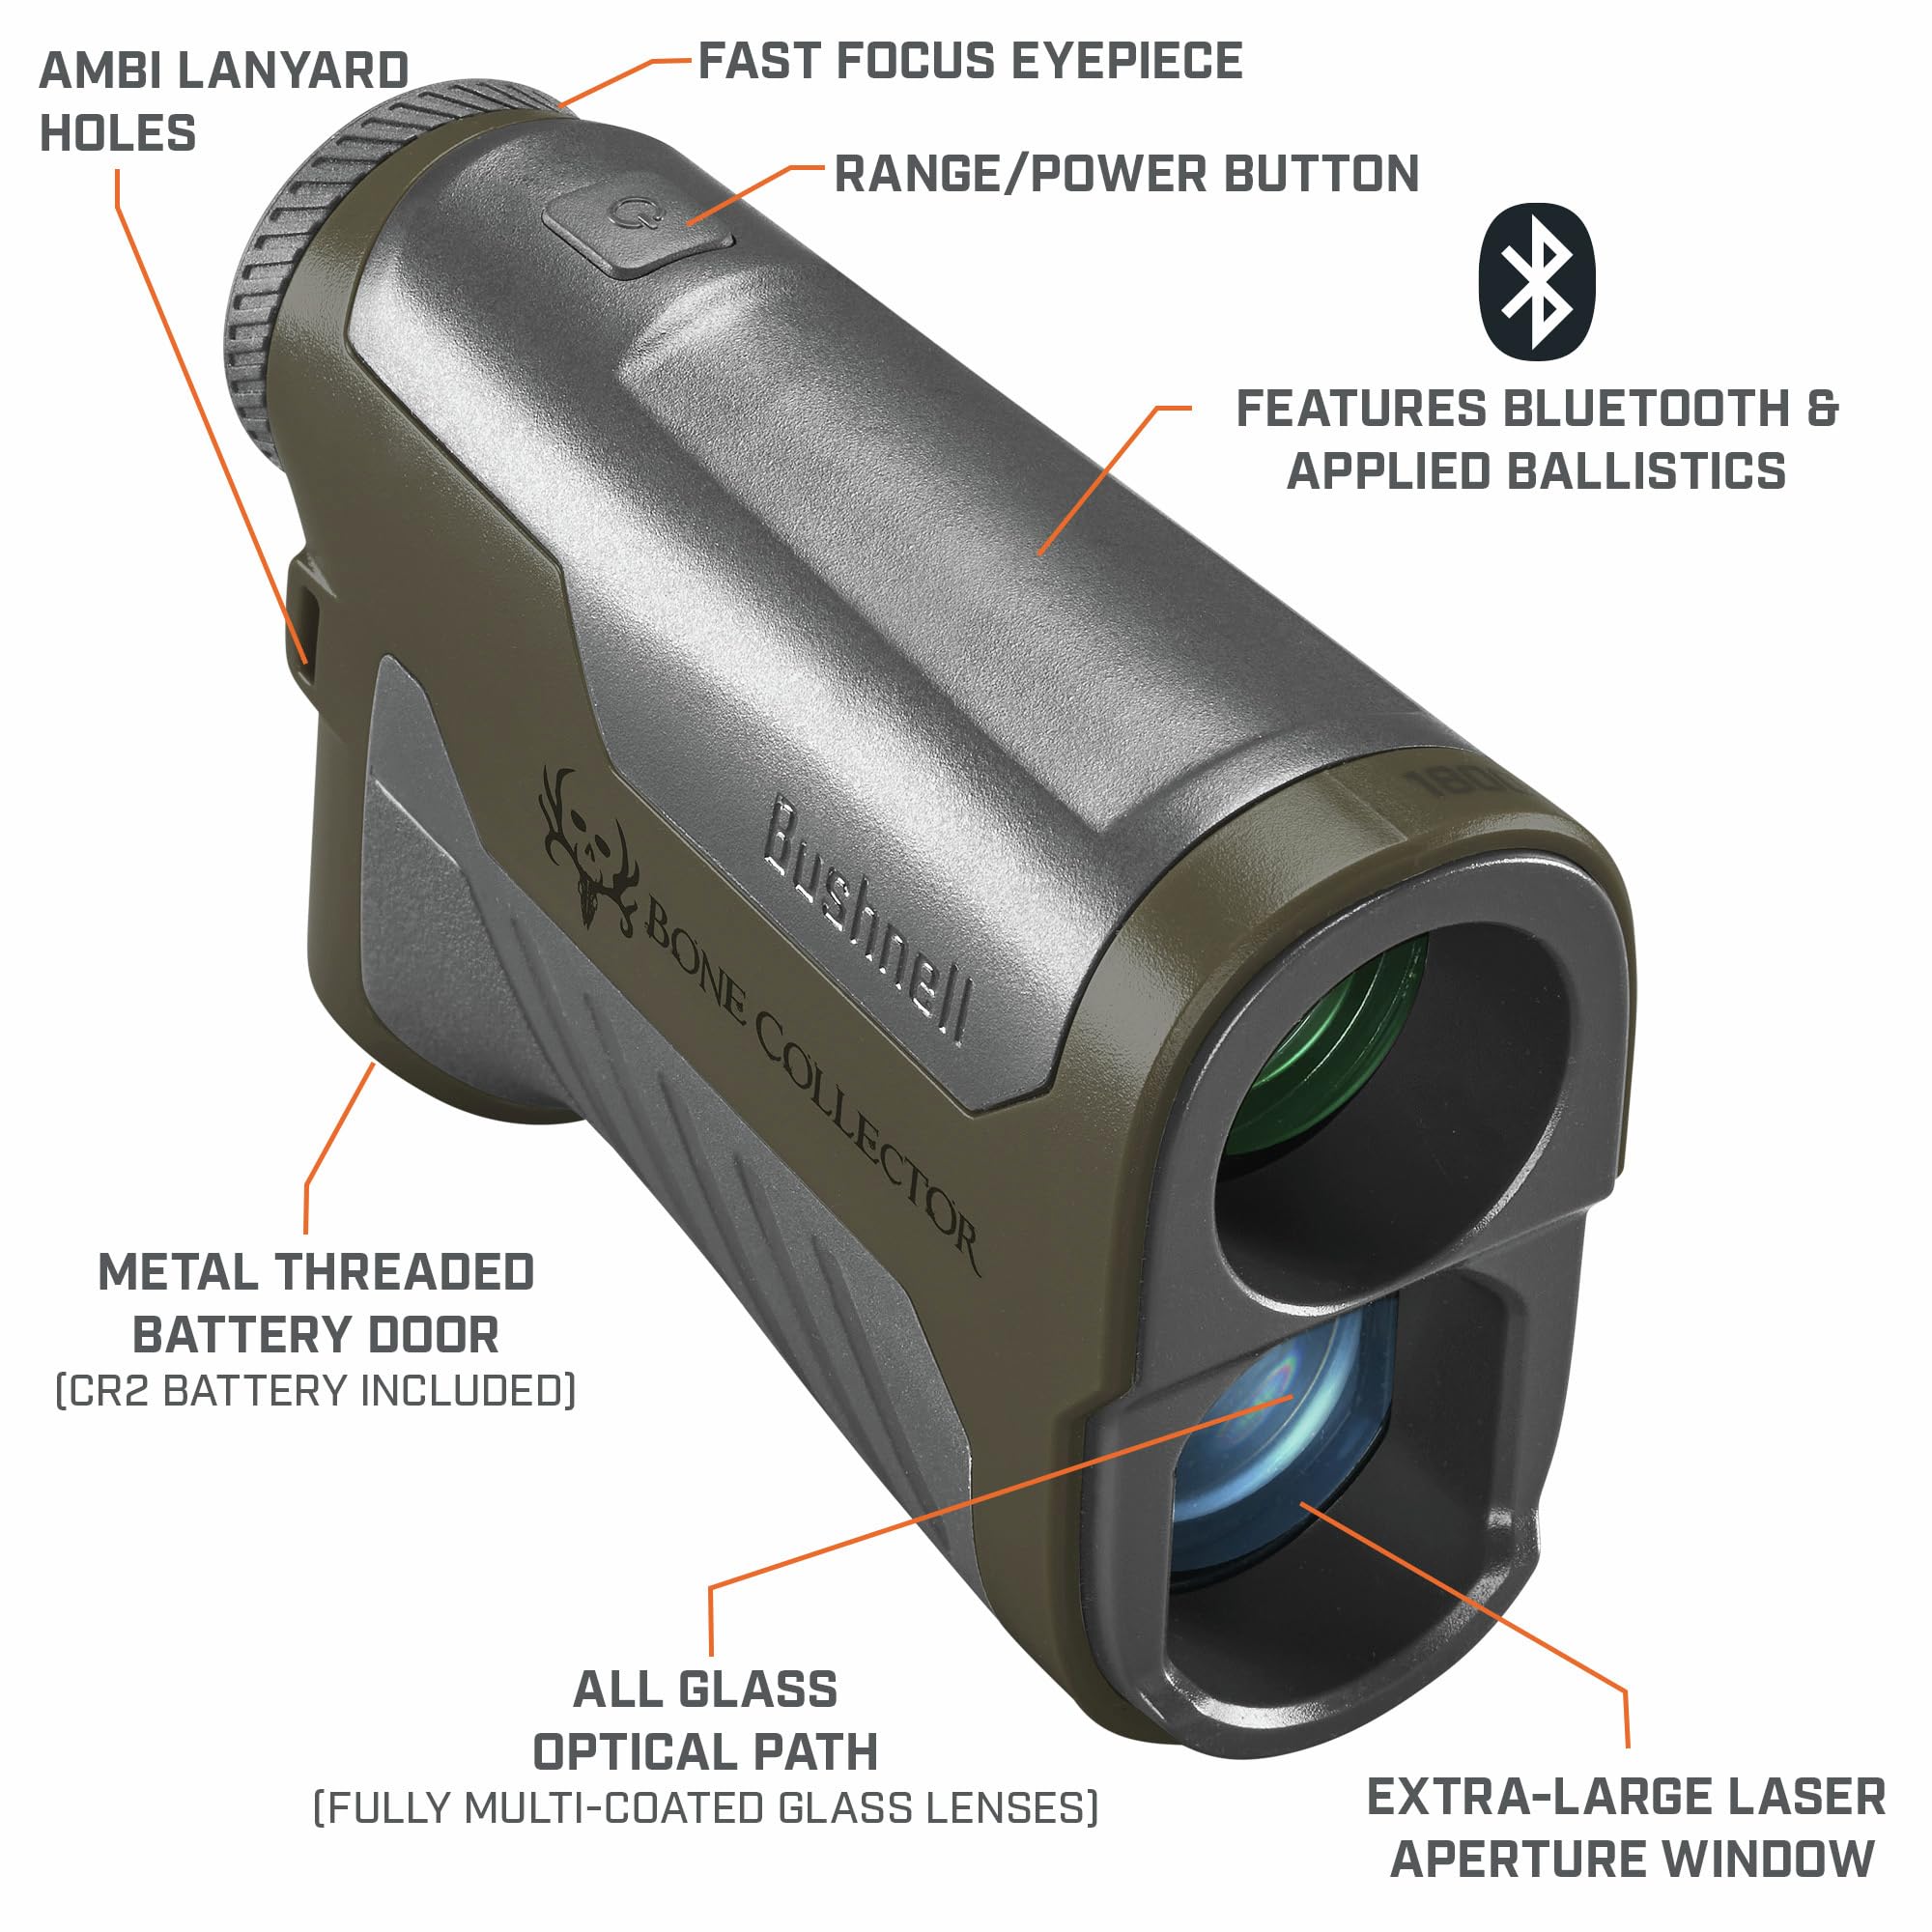 Bushnell Bone Collector 1800 Rangefinder, Hunting Range Finder with Bluetooth and Angle Range Compensation for Shooting and Hunting